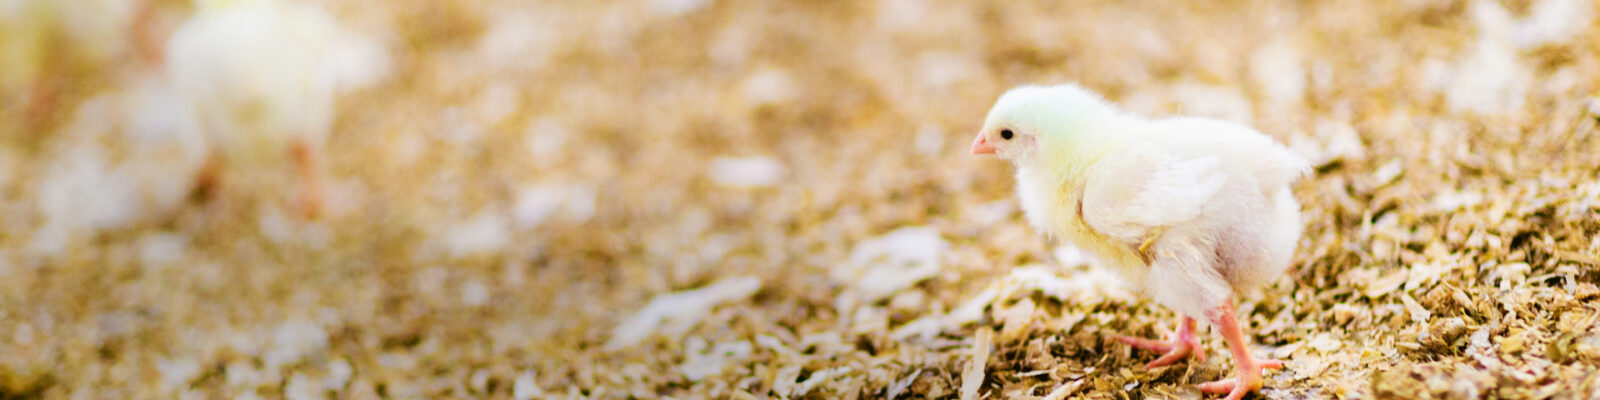 agriculture-banner-04